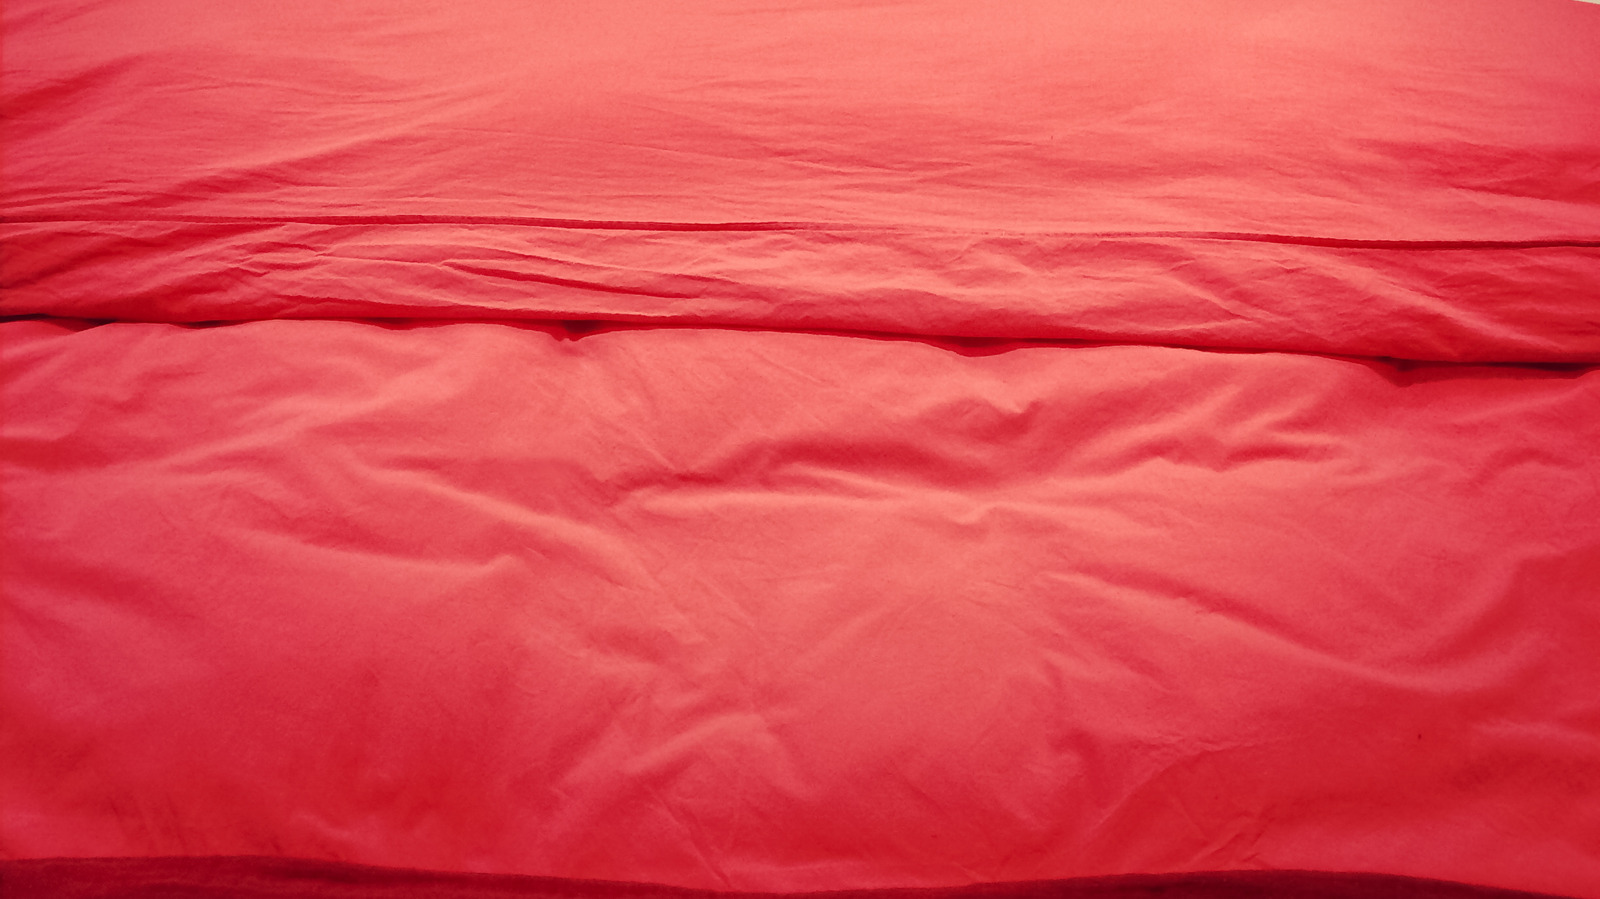 The Best Sheet Colors If You Have A Red Duvet - House Digest  